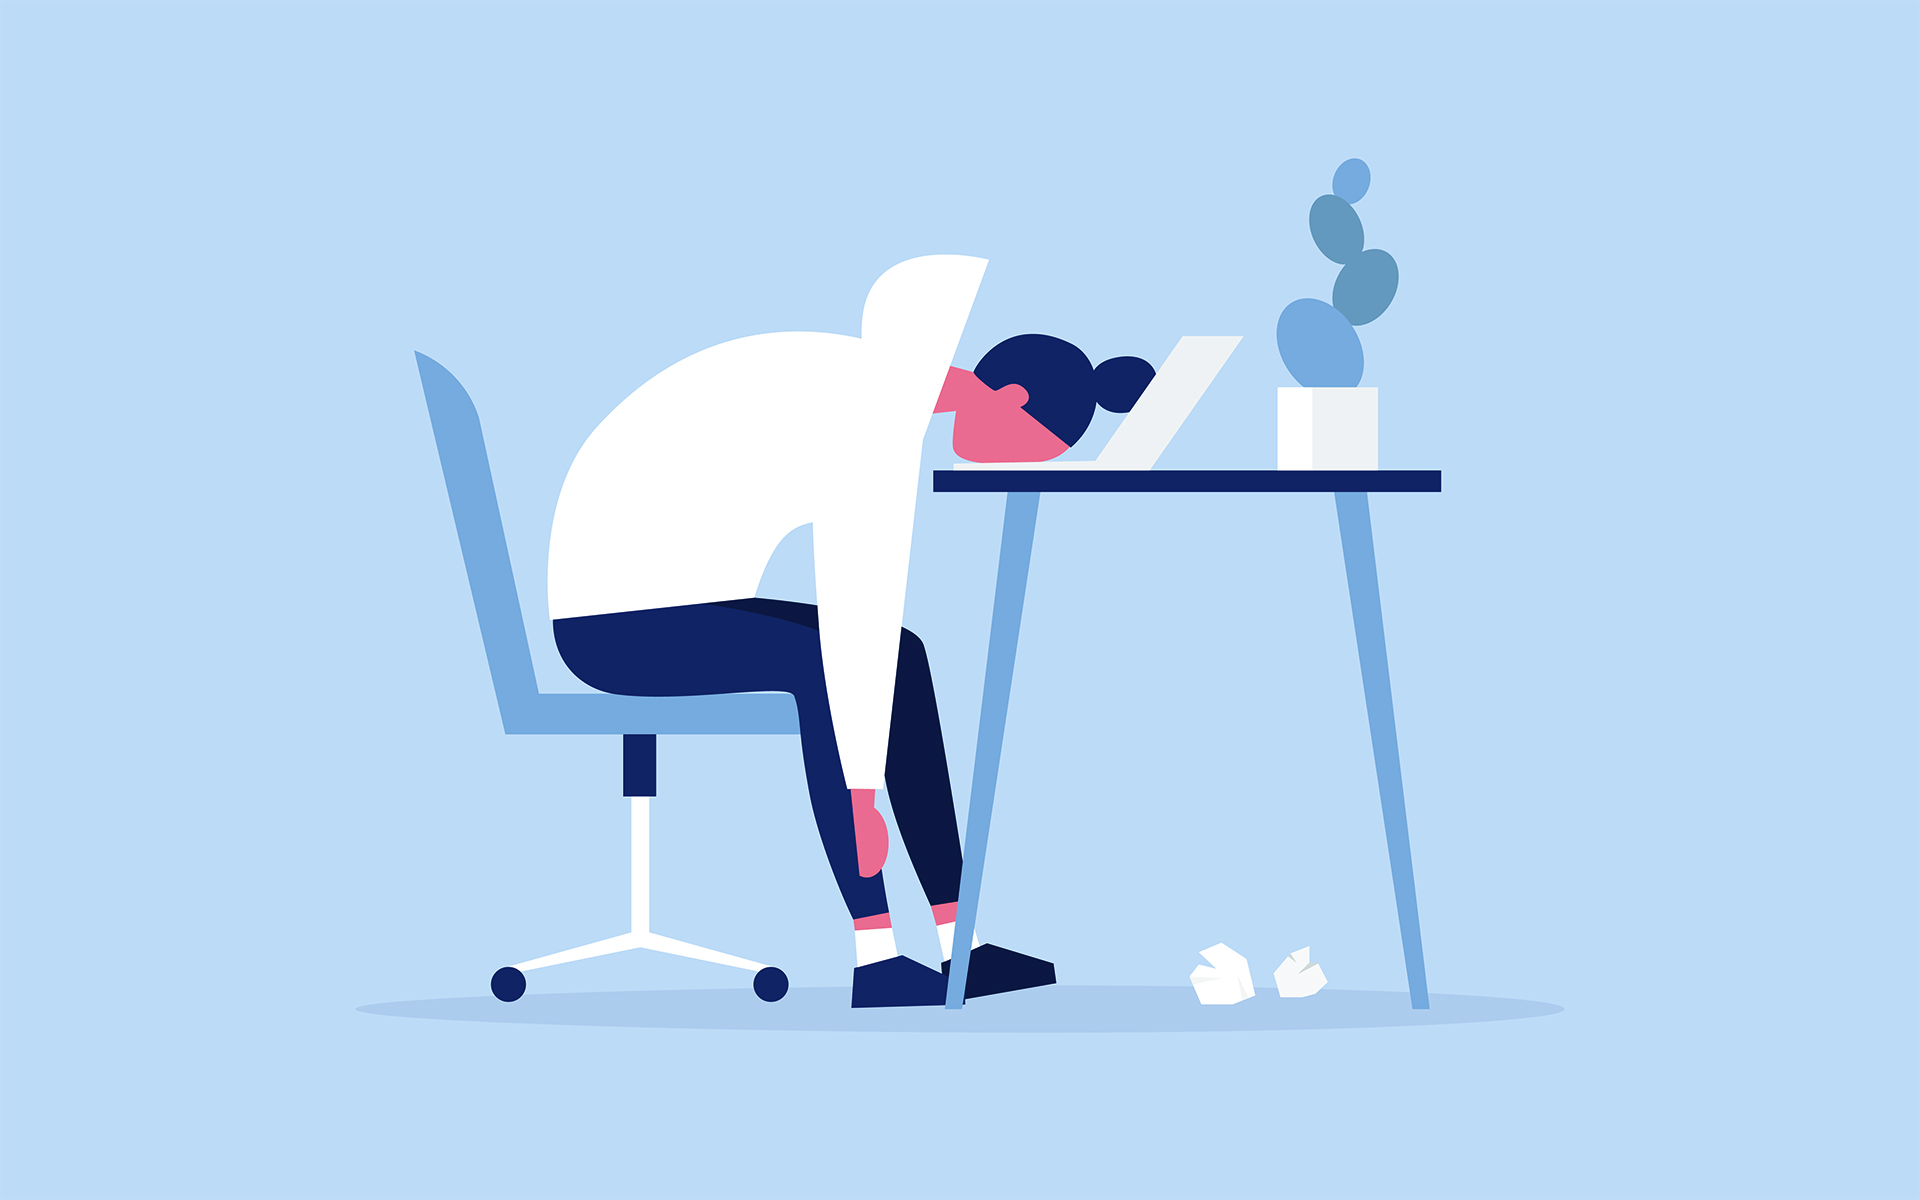 Video chatting exhaustion is real - Illustration of a woman with her head dropped on her keyboard